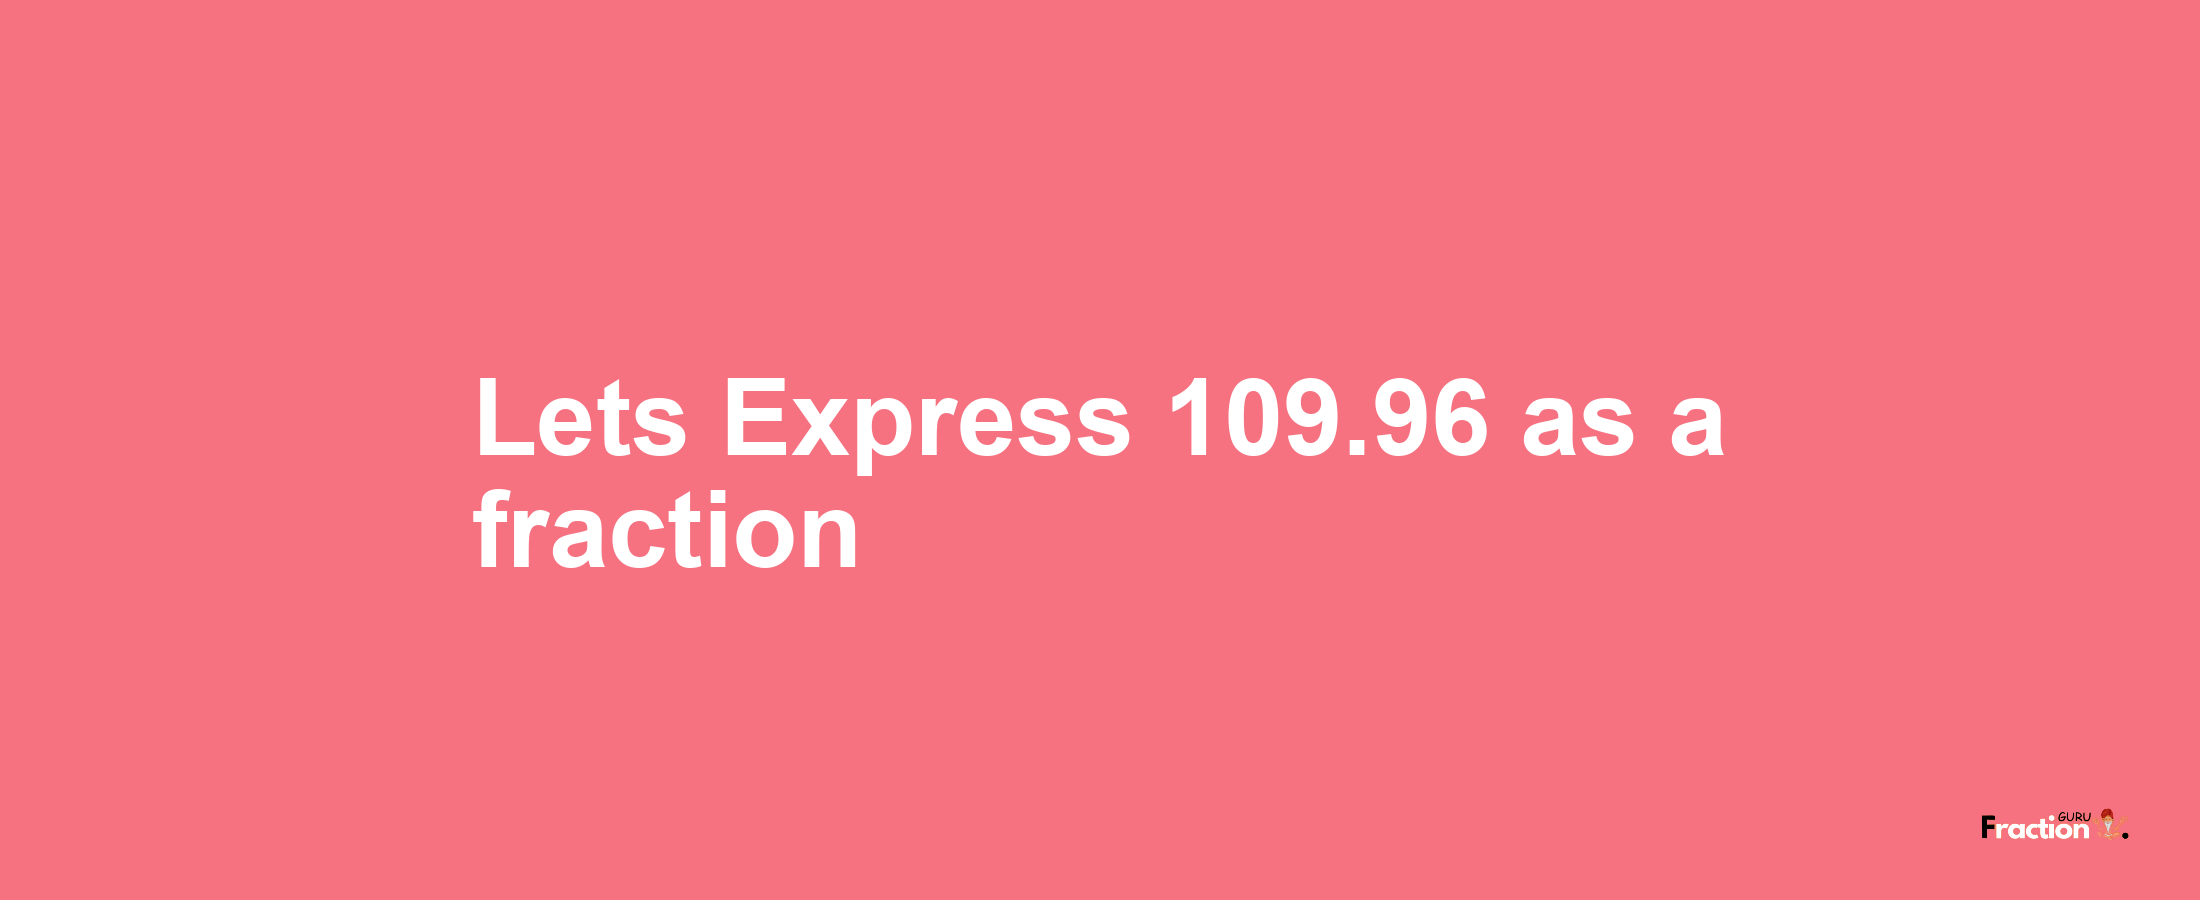 Lets Express 109.96 as afraction